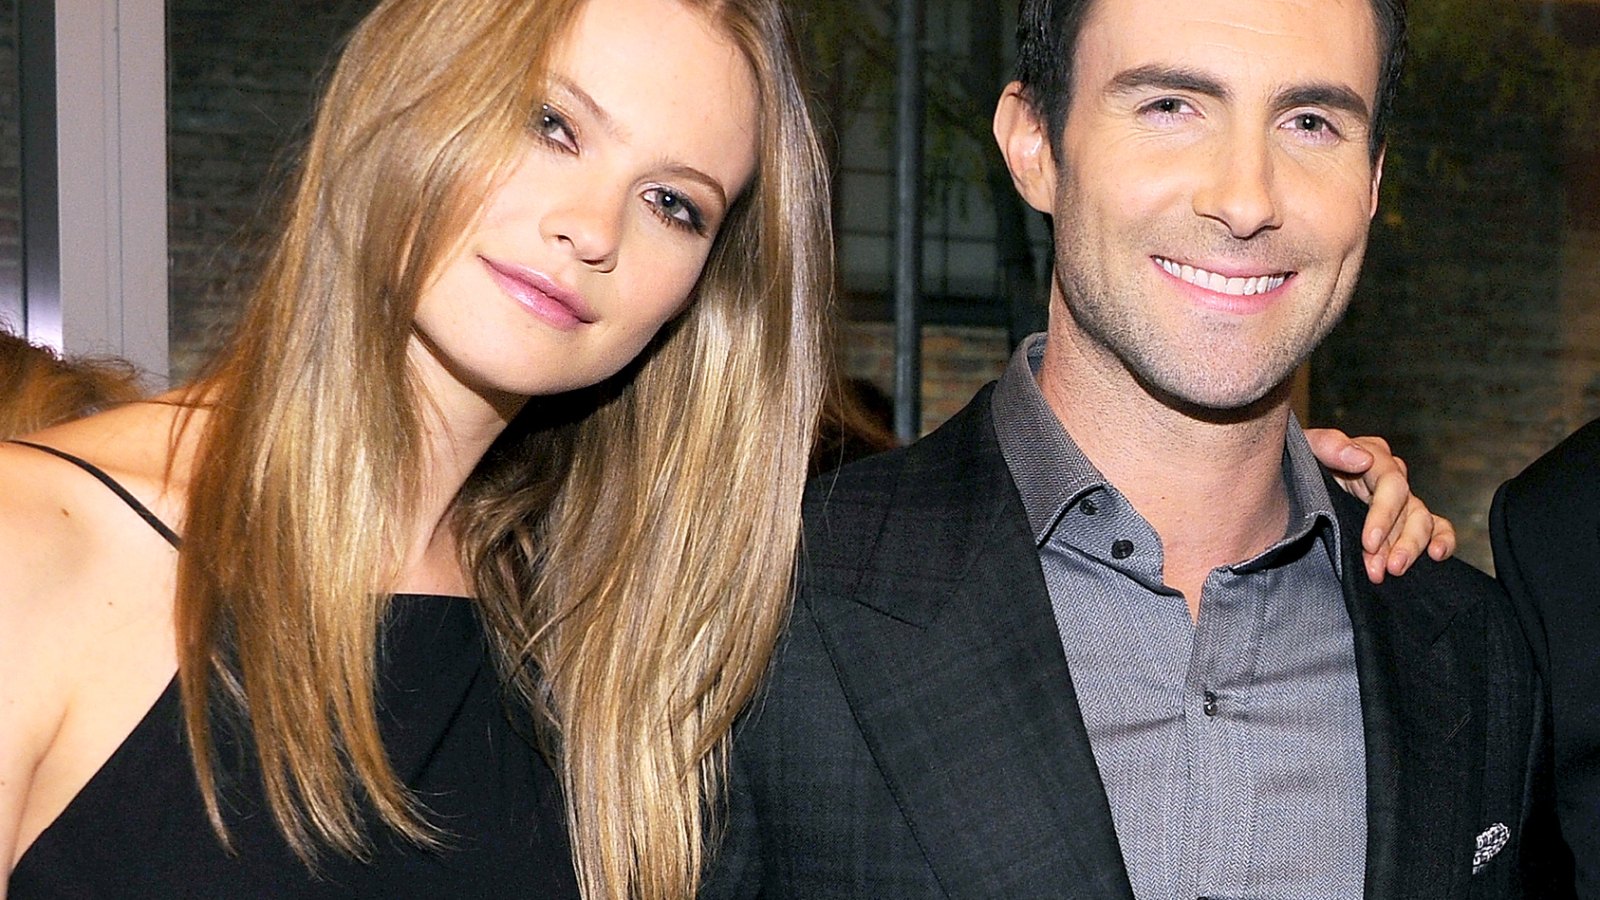 Adam Levine "knew he wanted to propose" to Behati Prinsloo